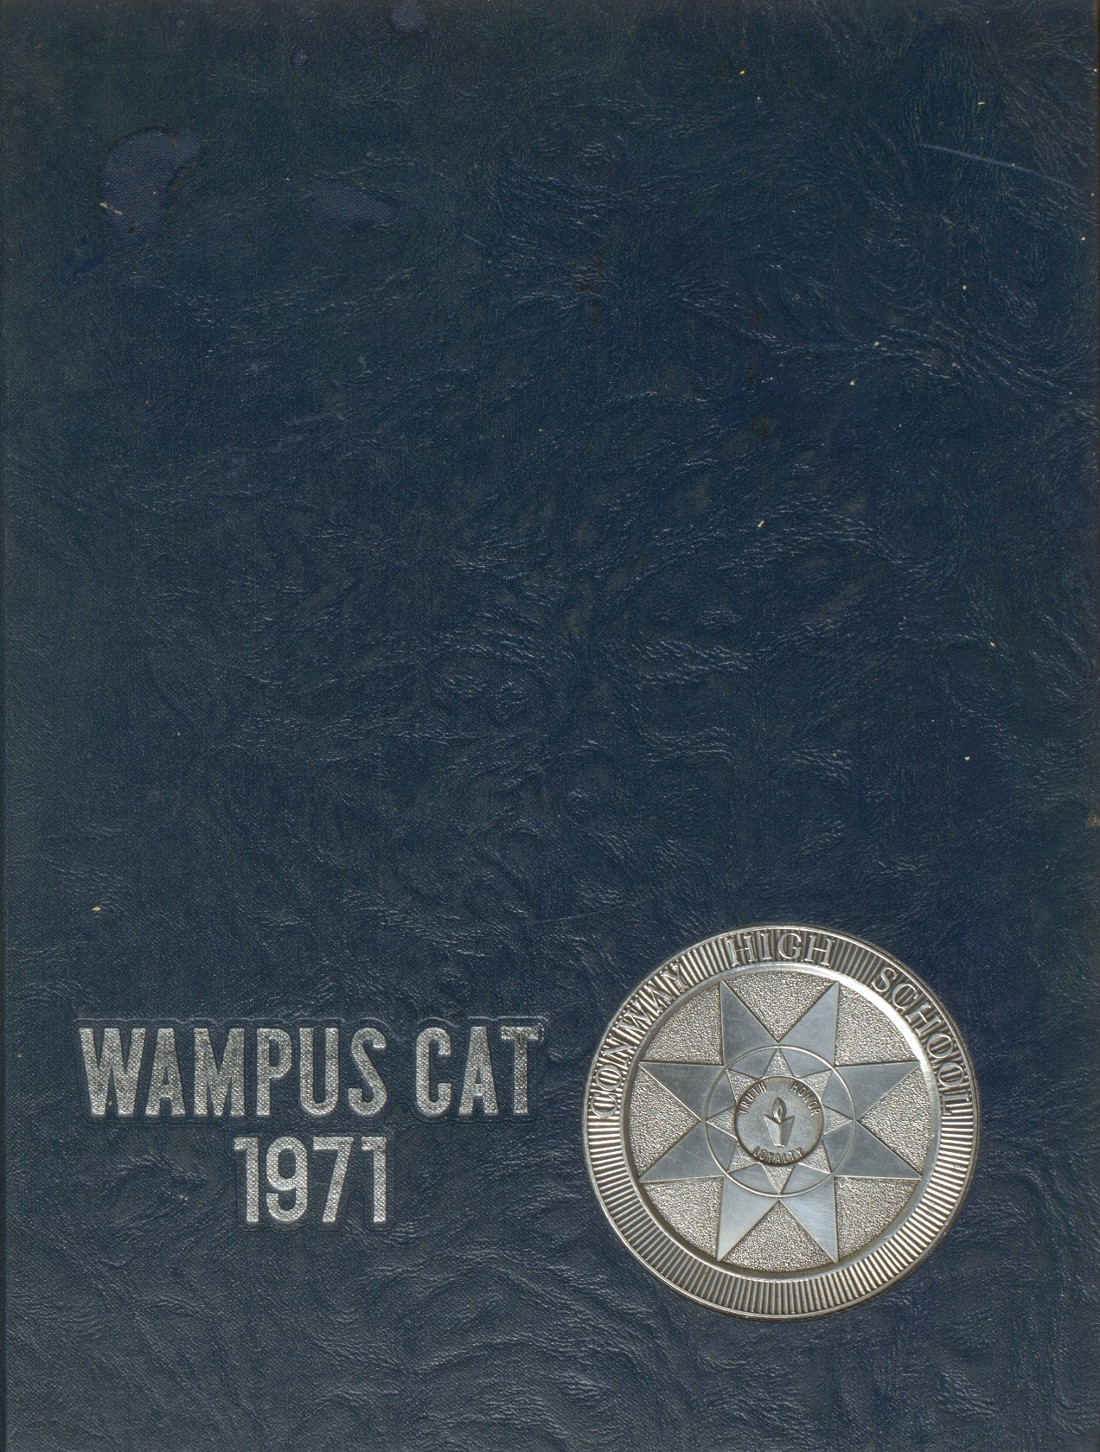 1971 yearbook from Conway High School from Conway, Arkansas